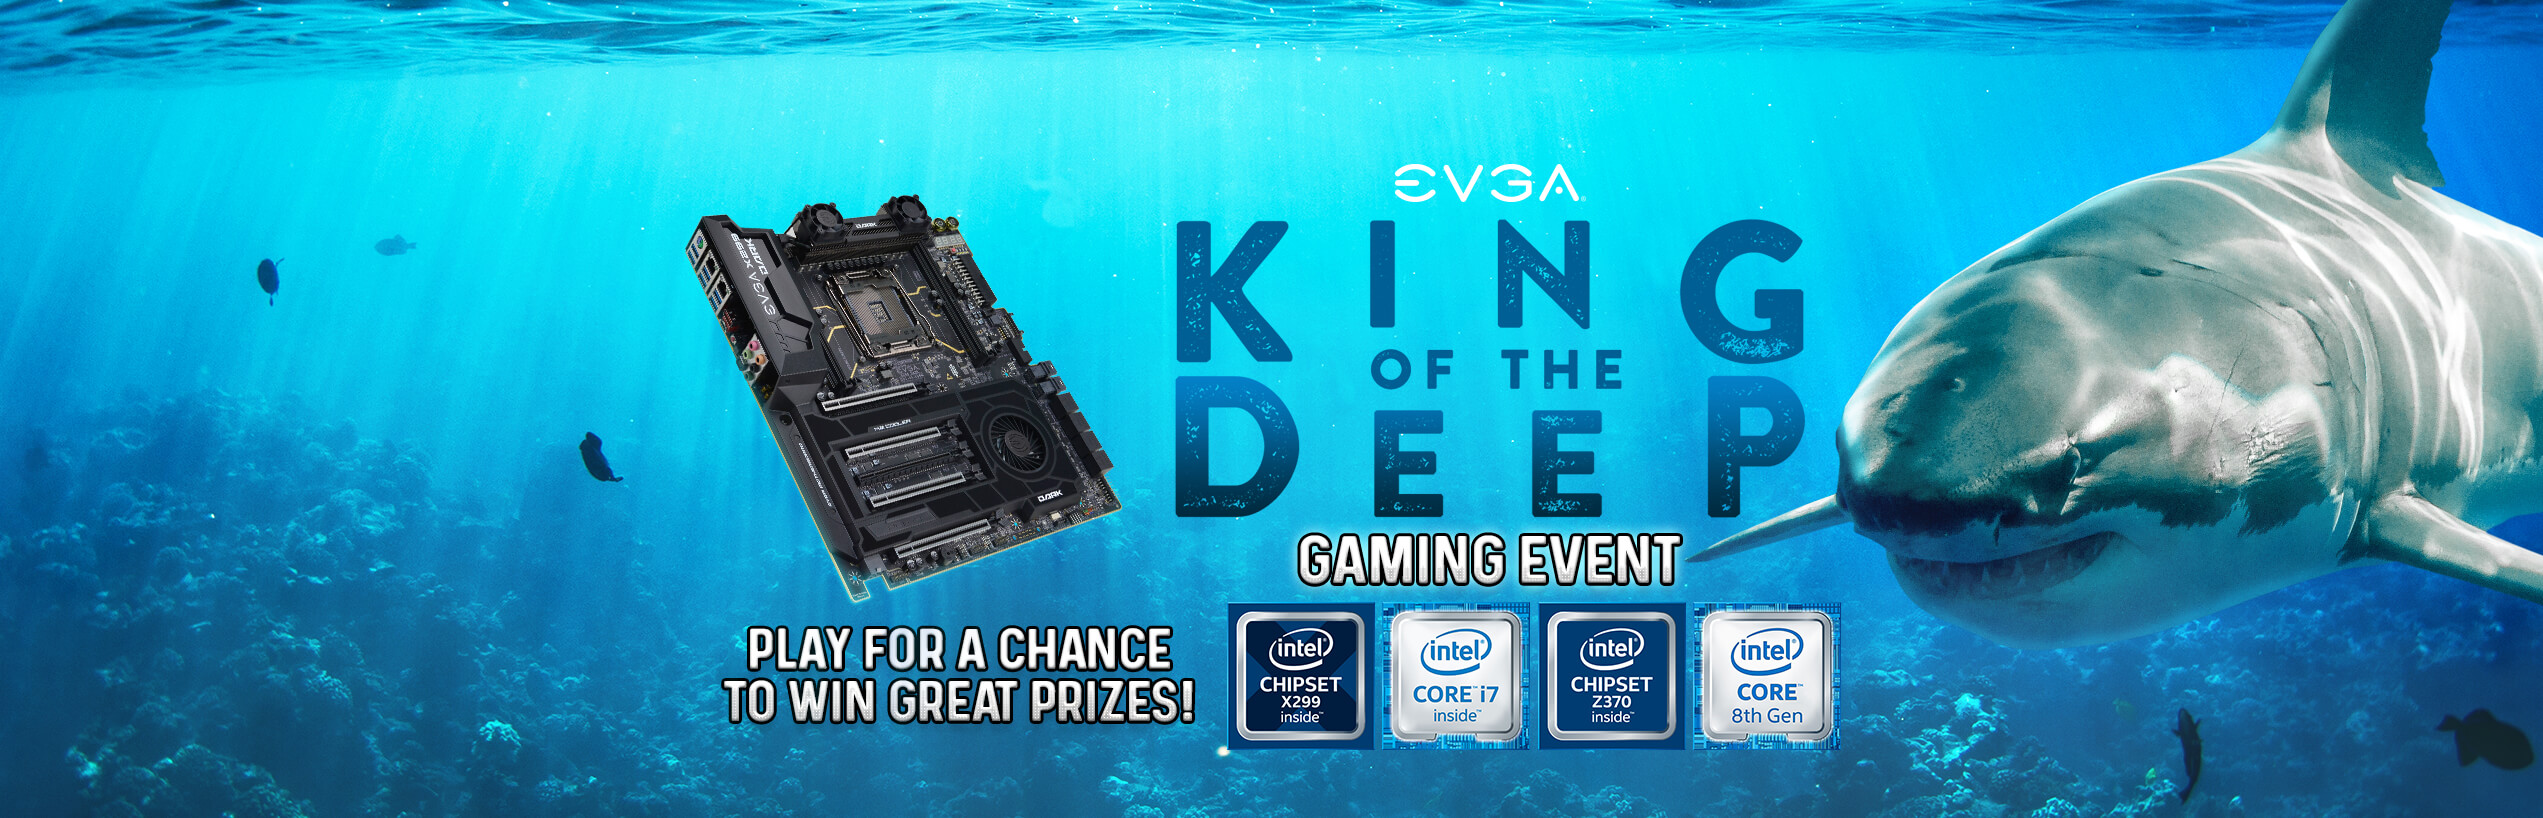 King of the Deep Gaming Event